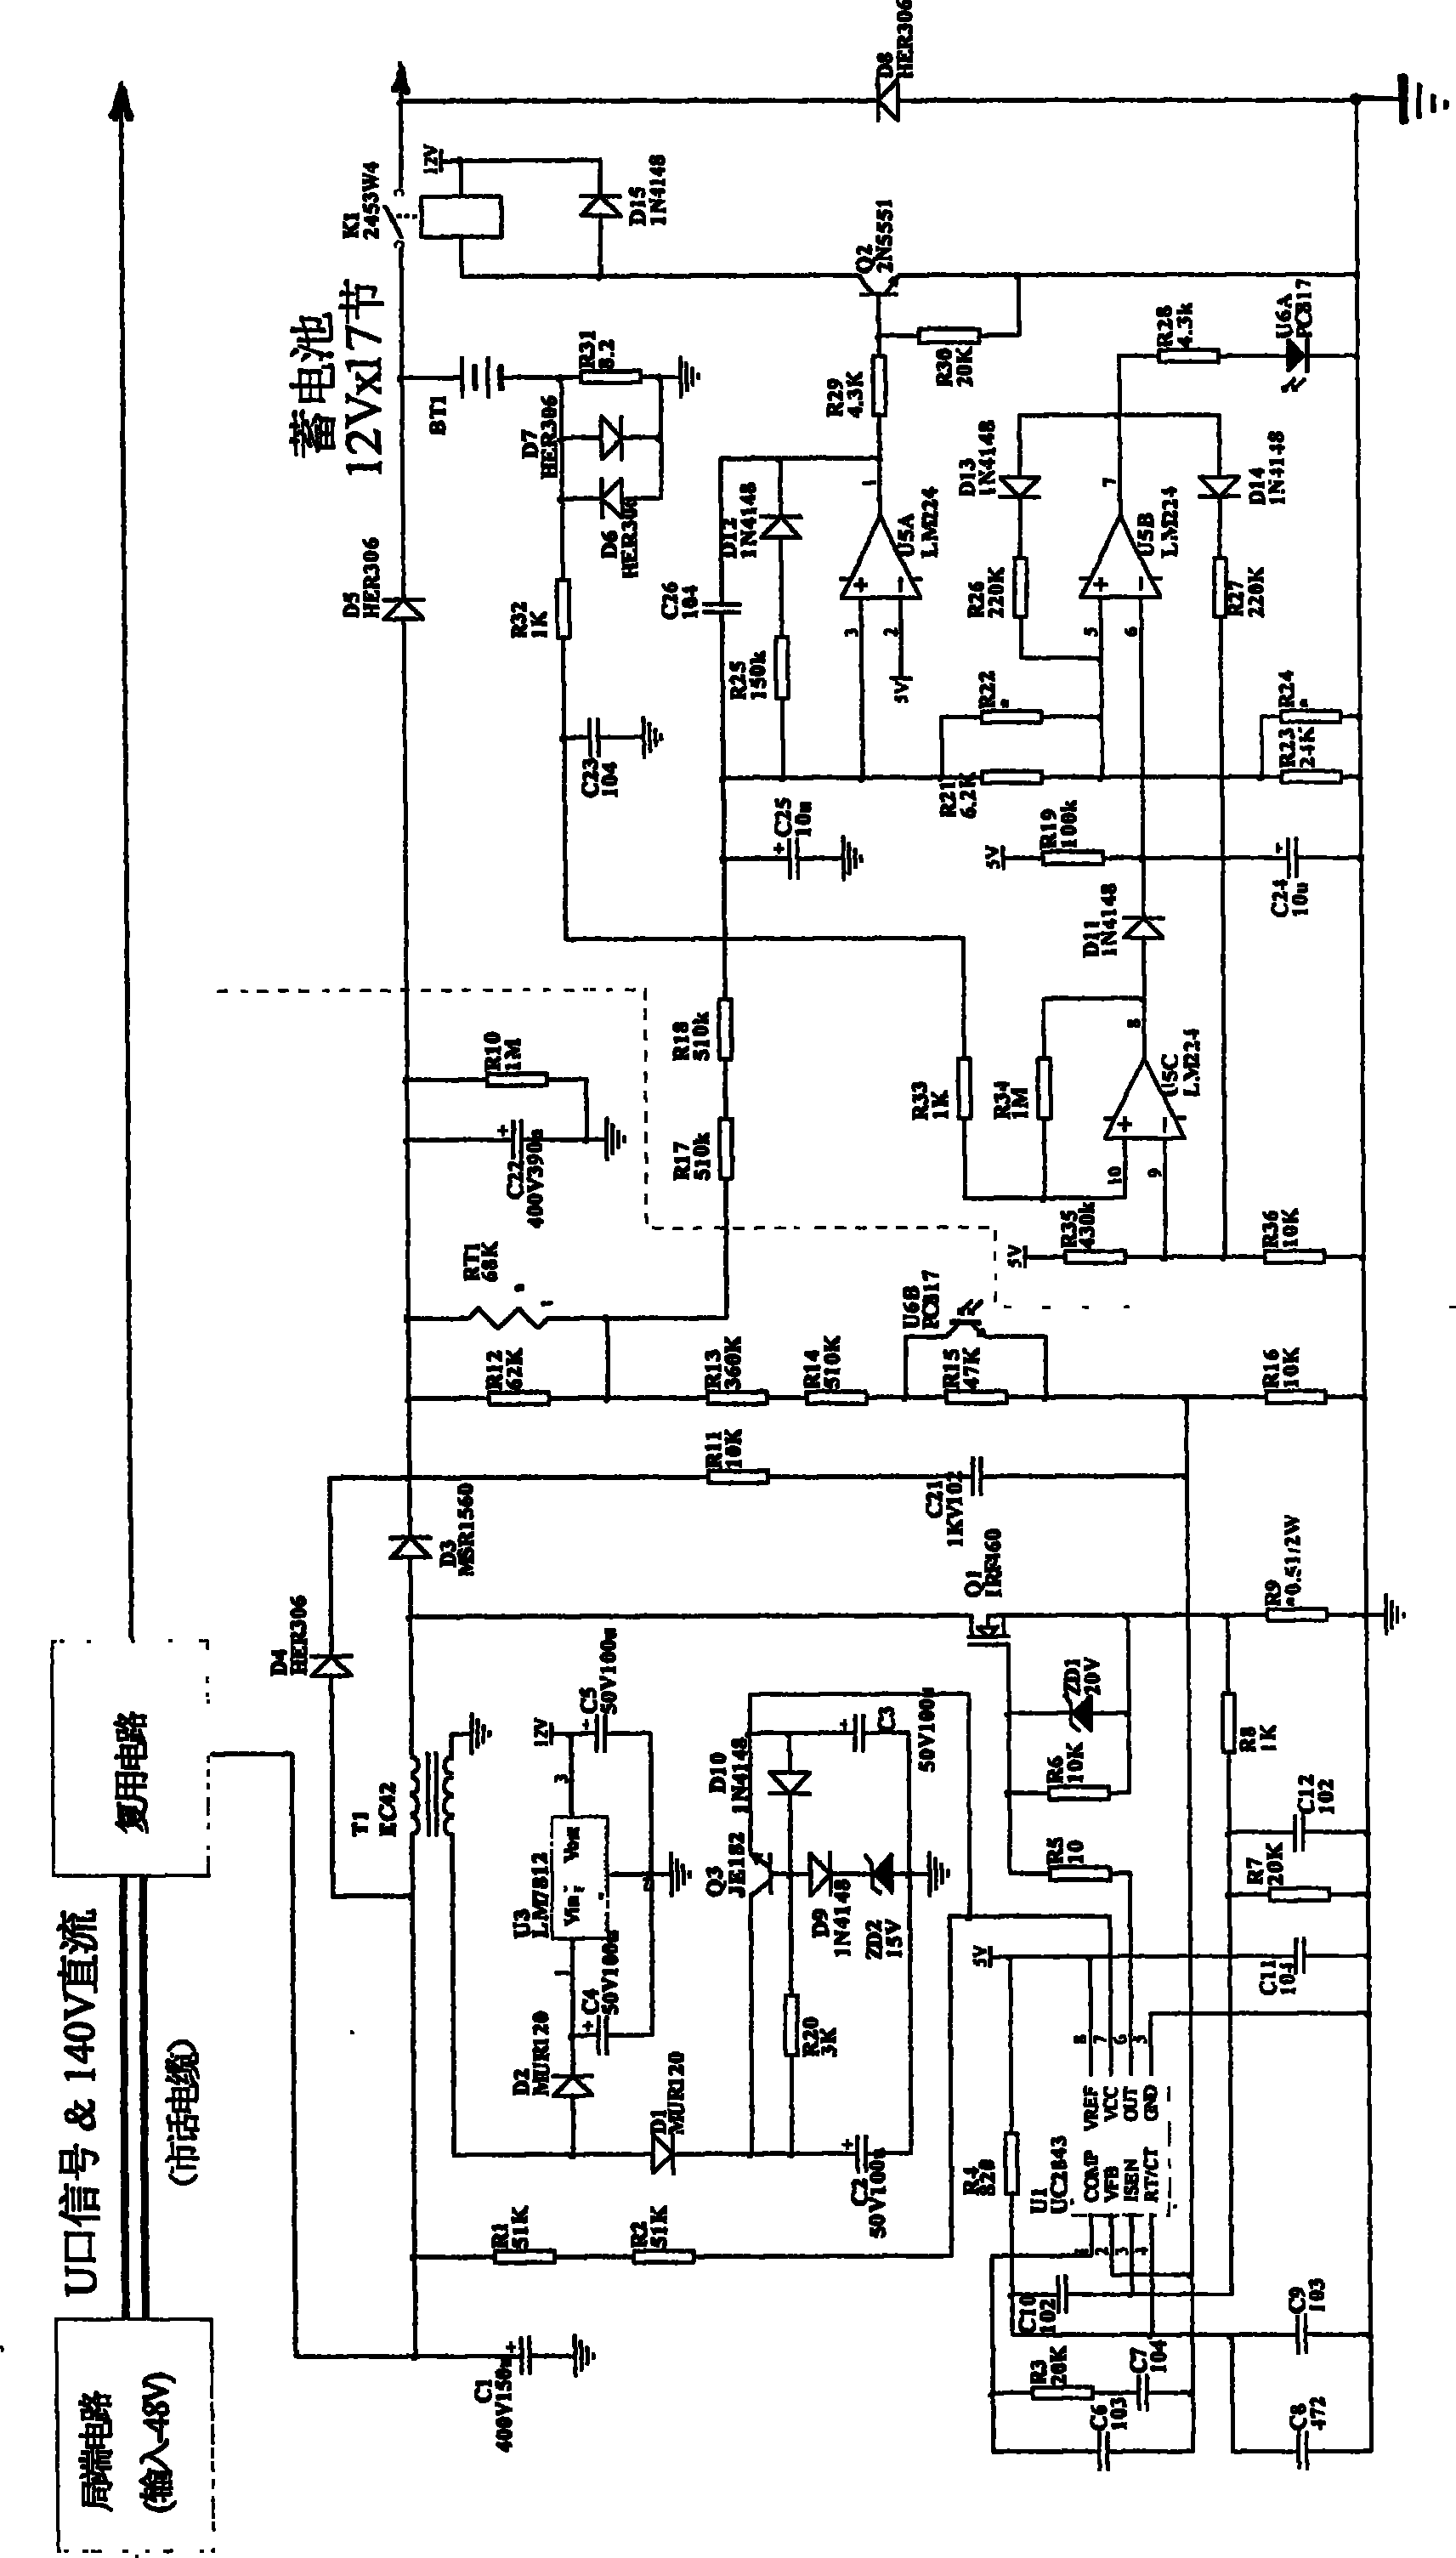 Self-adaptive low-voltage remote power supply device of little smart and its working method